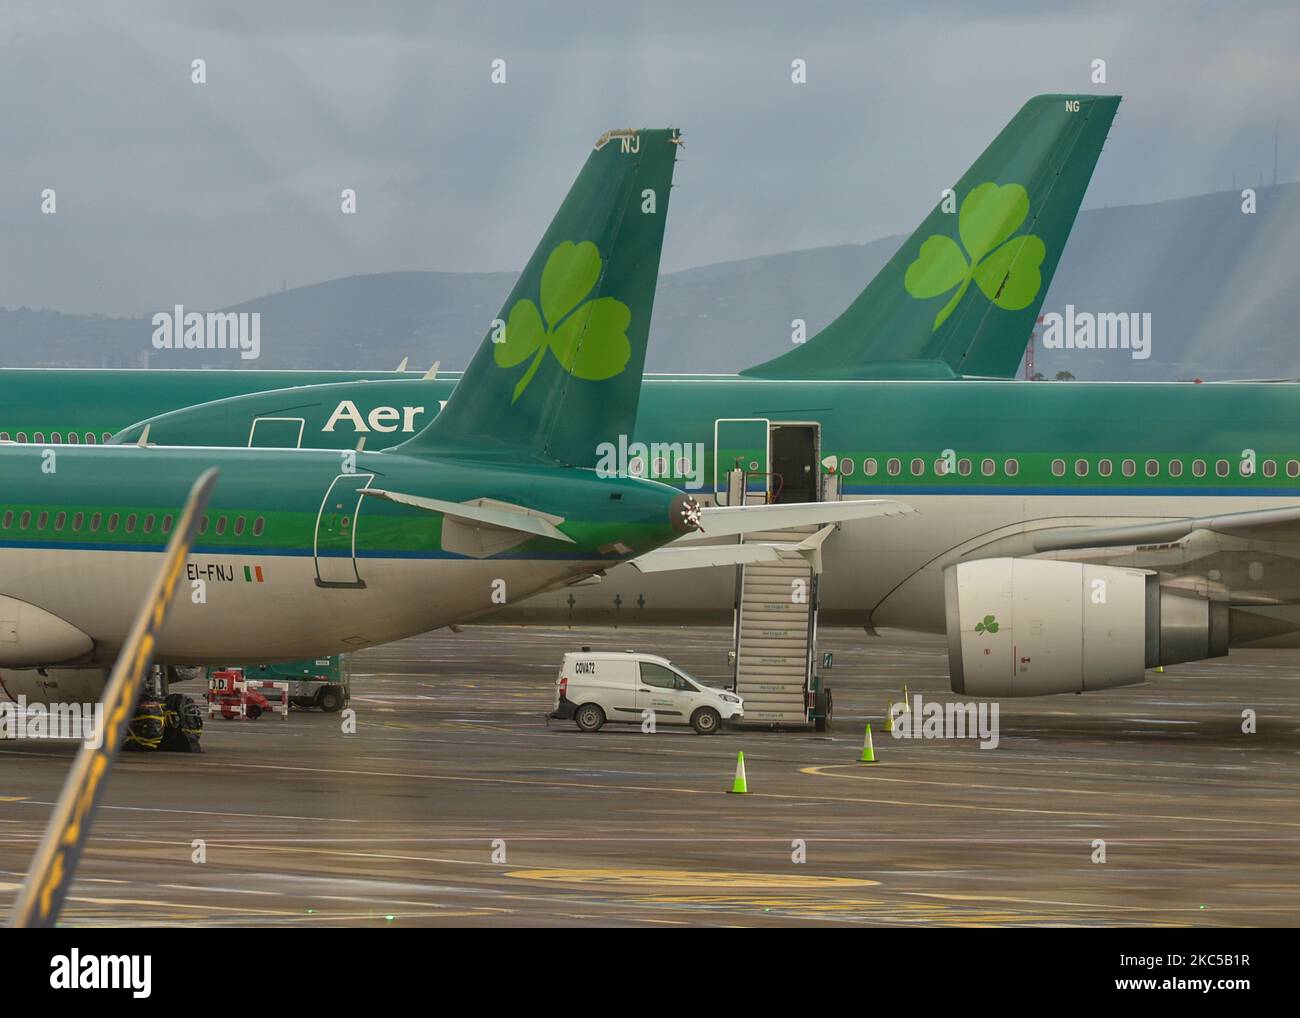 Aer Lingus planes seen grounded at Dublin Airport, during the coronavirus lockdown level 3. The pandemic has had a 'devastating' impact on the operator of Dublin airport. DAA's losses at the beginning of September 2020 were approaching €150 million - according to its chief executive Dalton Philips. Many airports across the EU are now under intense financial pressure due to the slump in passenger numbers because of the Covid pandemic. On Saturday, December 05, 2020, in Dublin Airport Dublin, Ireland. (Photo by Artur Widak/NurPhoto) Stock Photo